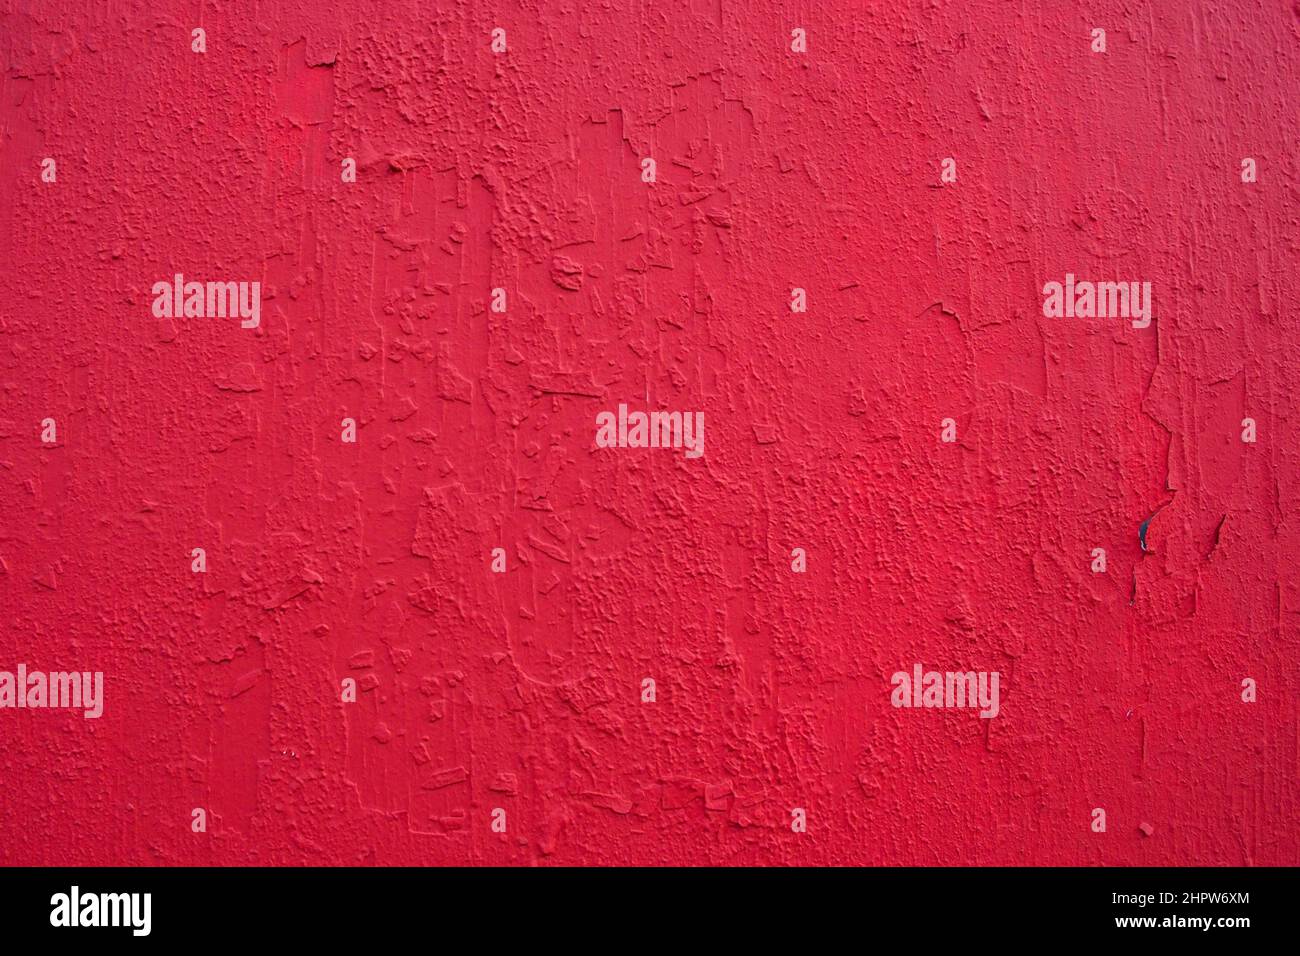 Texture of rough concrete wall covered and painted red decorative stucco. Background of blood-red colored plaster with cracks on concrete wall.  Stock Photo